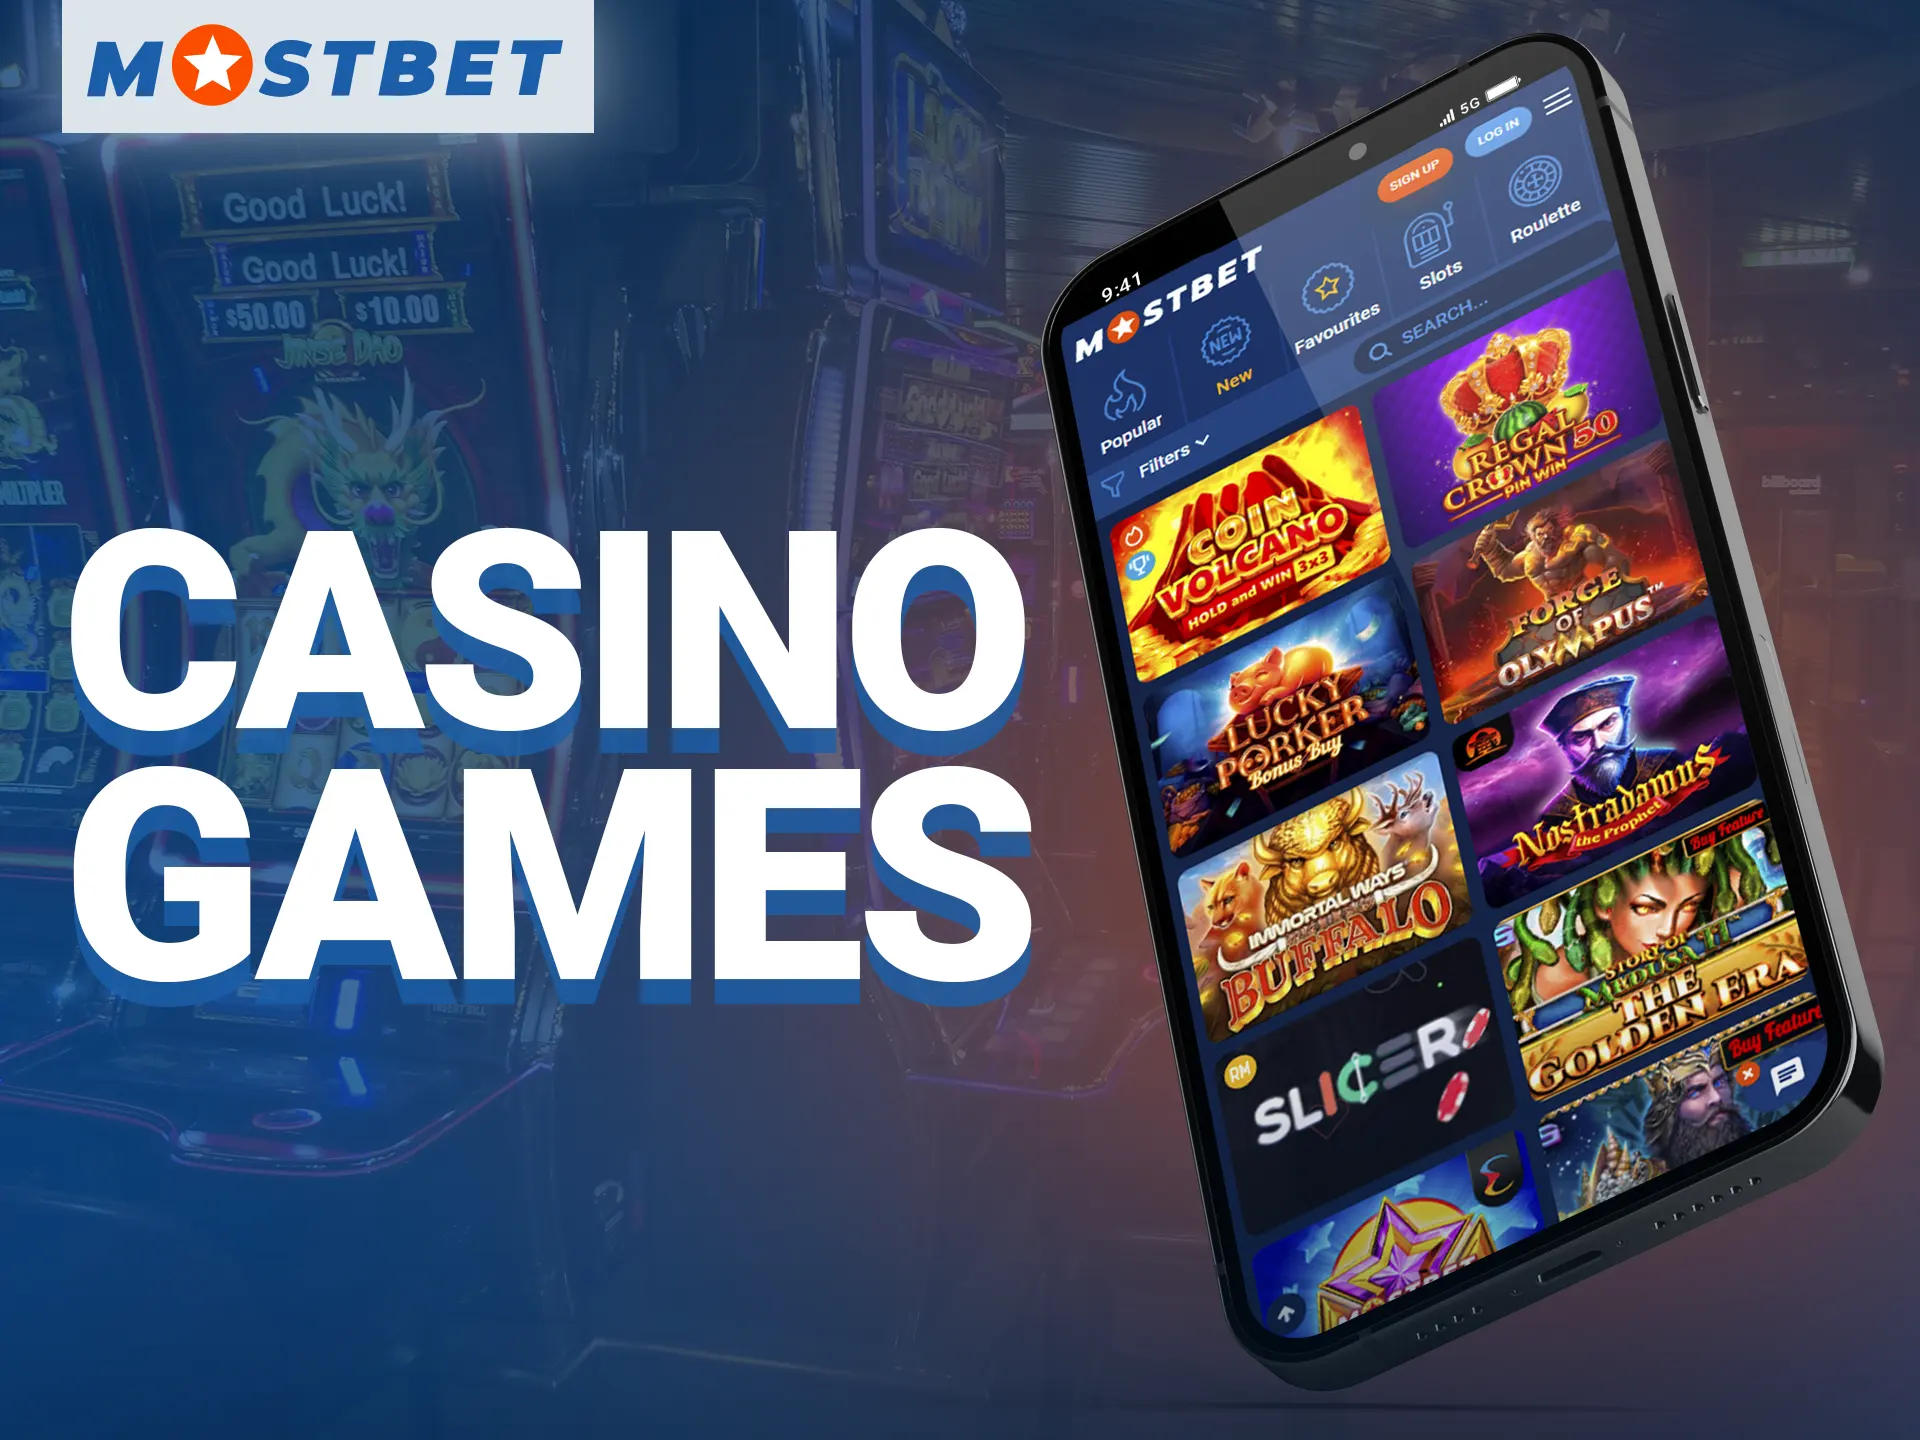 The Mostbet app offers an extensive selection of exciting casino games.